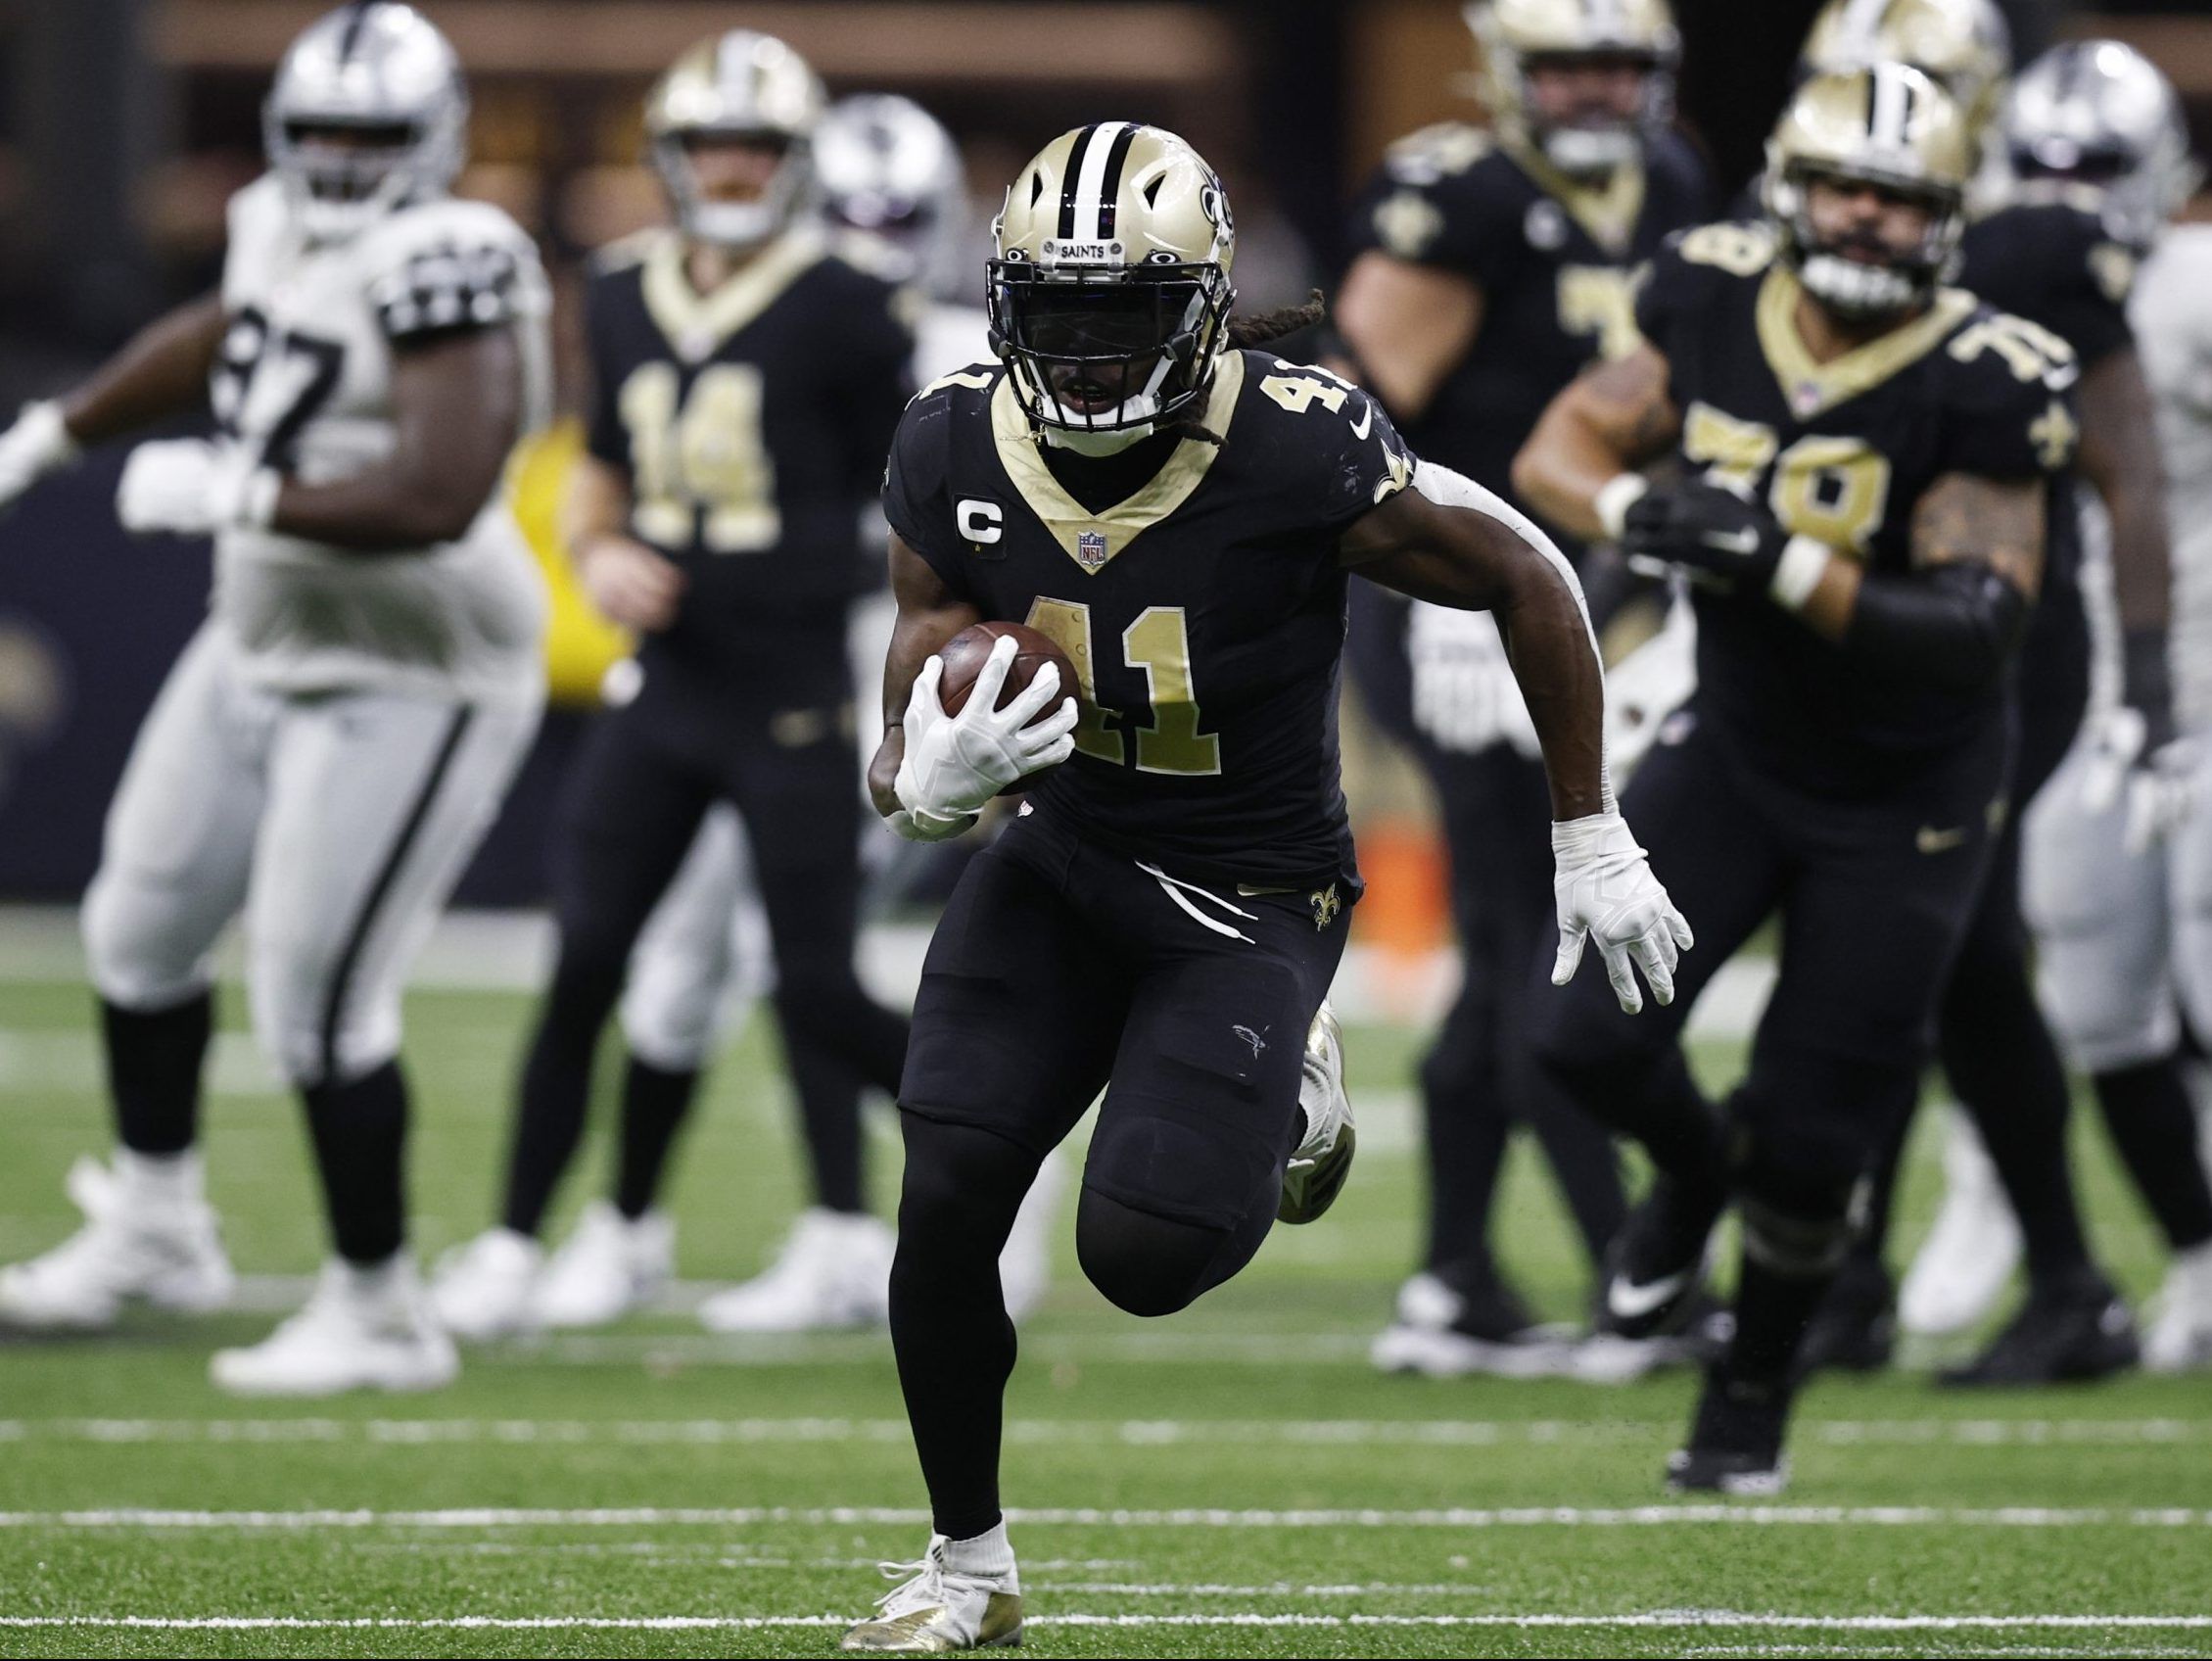 Saints' Kamara suspended for 3 games, apologizes for role in 2022